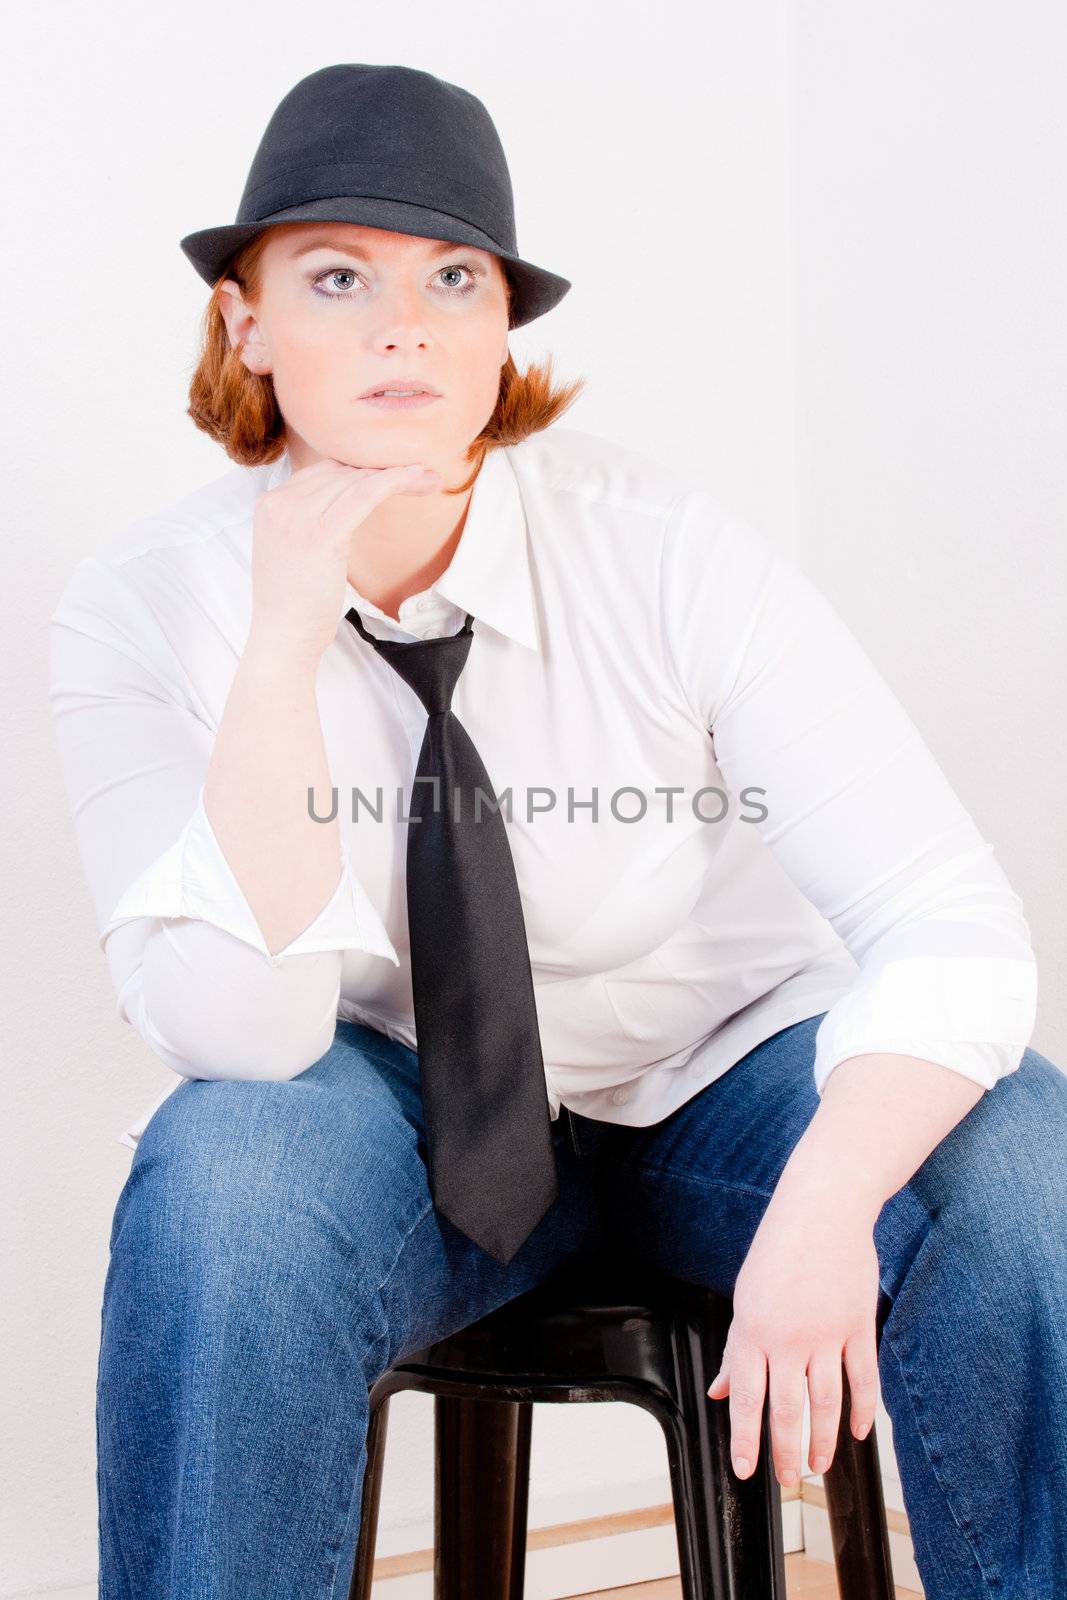 Fashionable Plus Size Model with a hat and tie